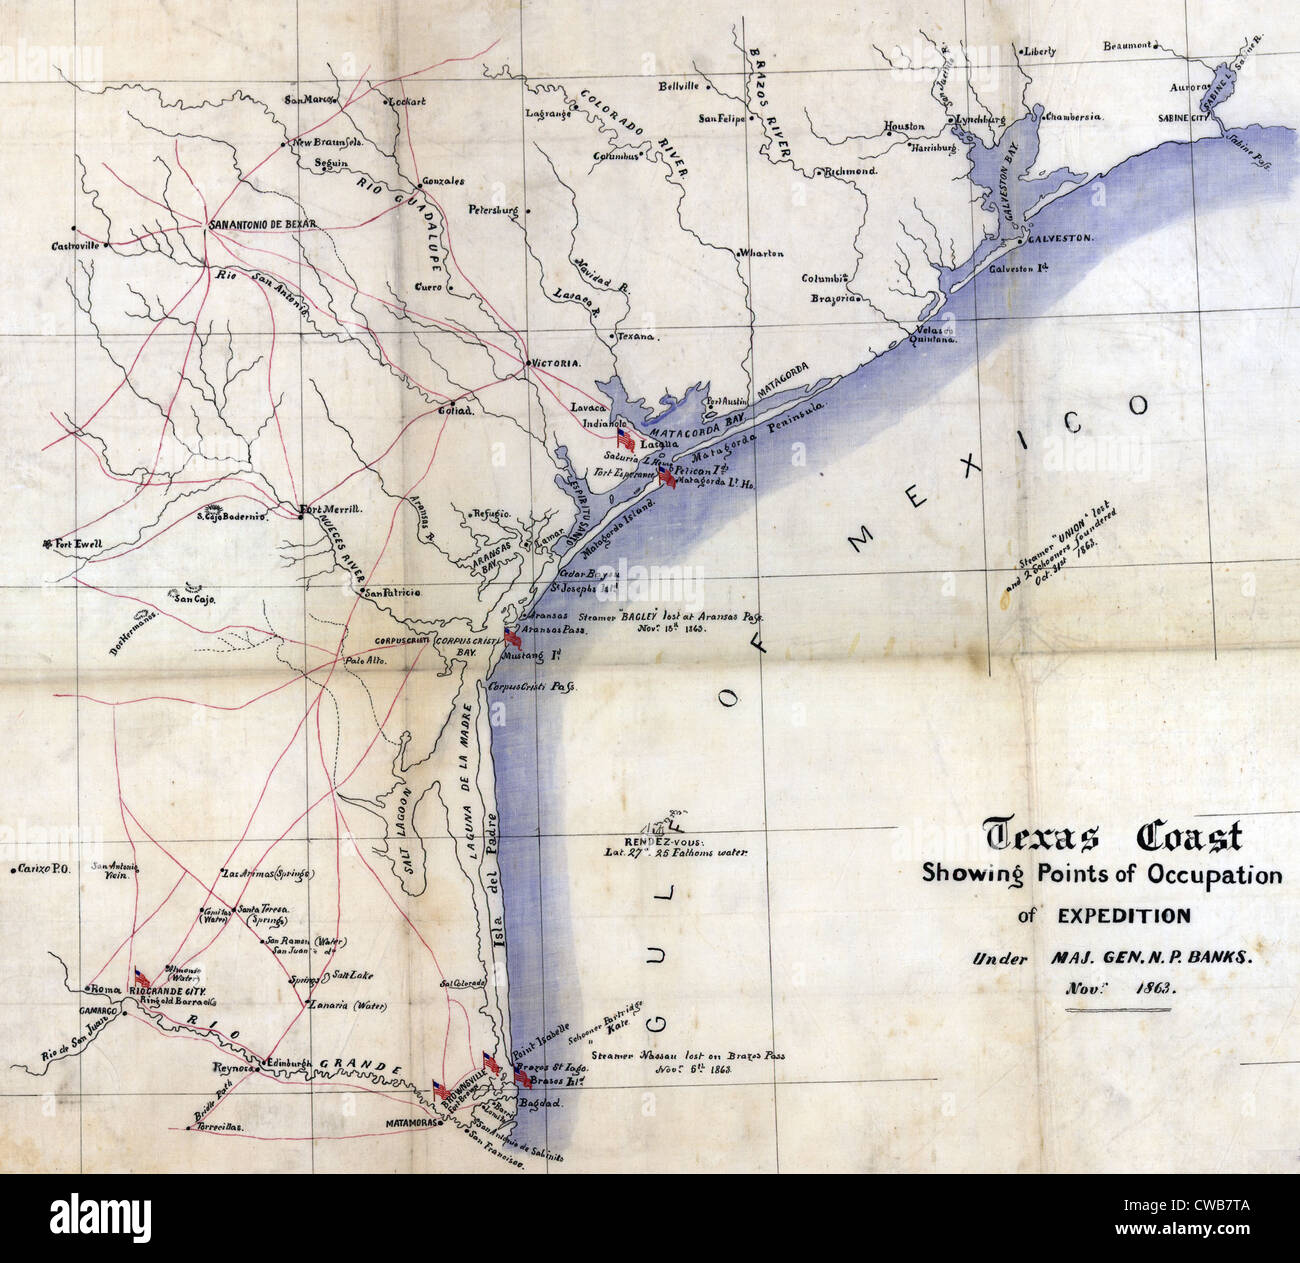 Texas Coast showing points of occupation of expedition under Maj. Gen. N.P. Banks. Shows towns, rivers, roads, selected Stock Photo